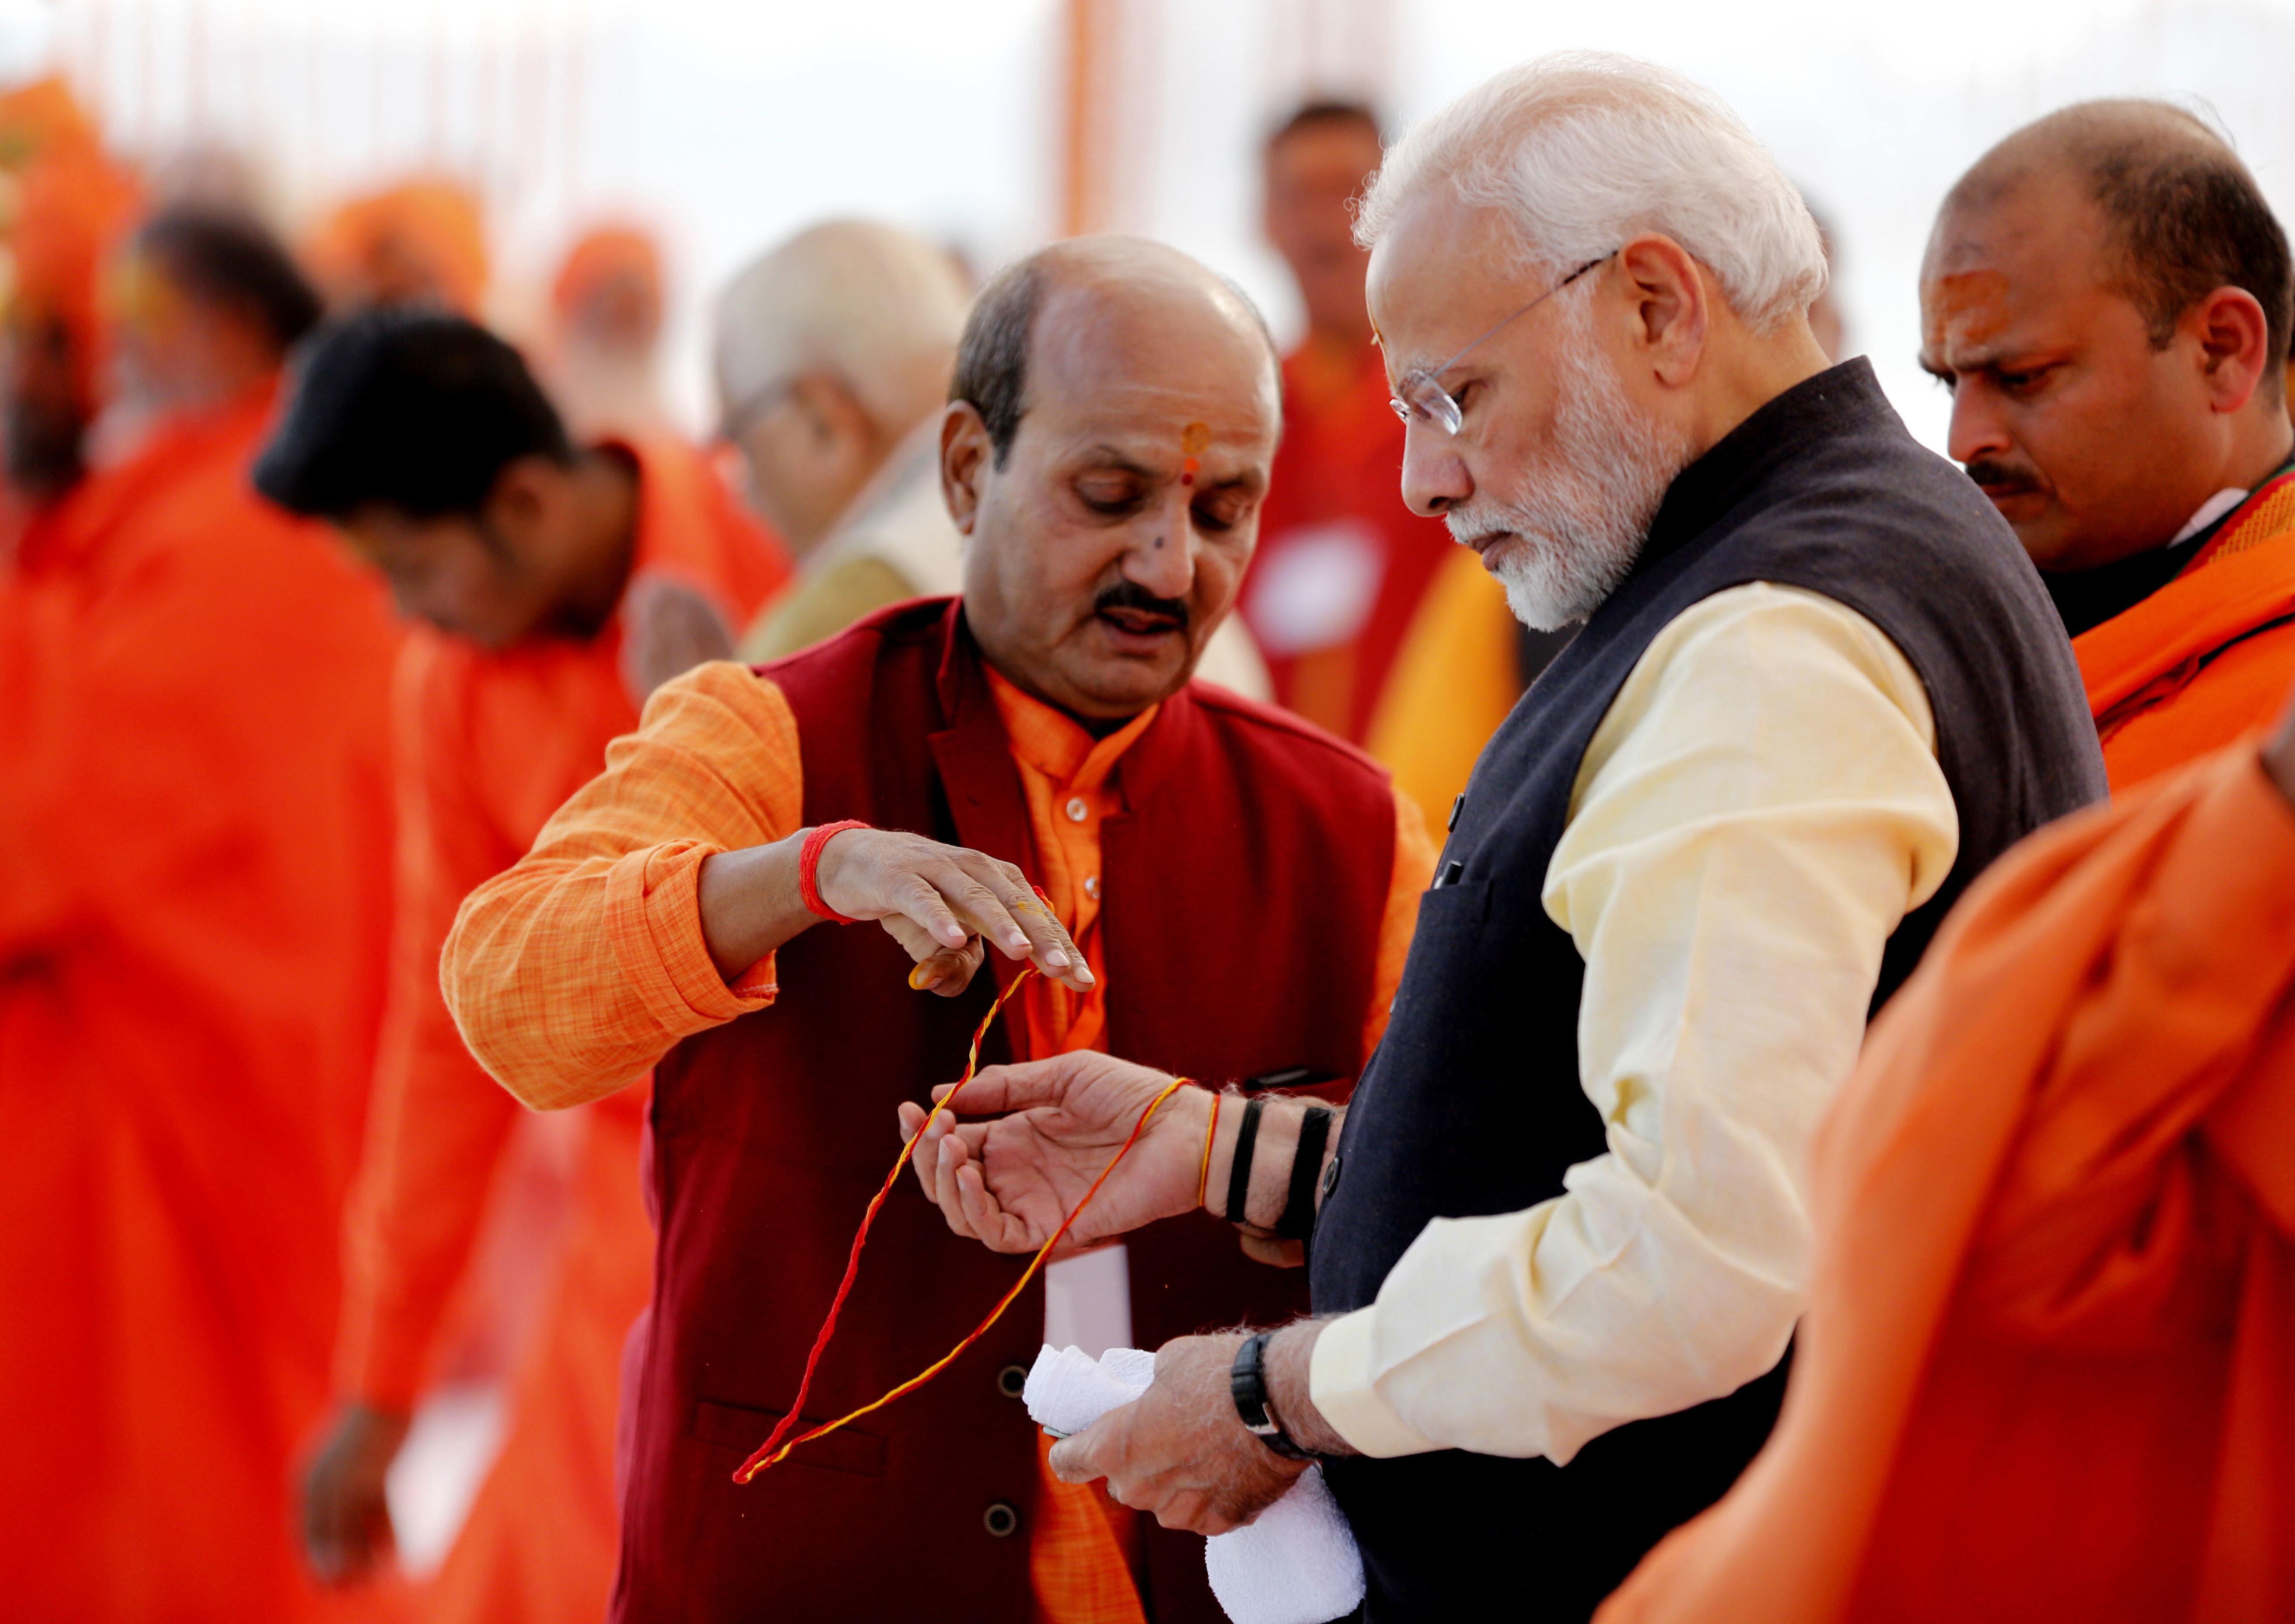 A Hindu holy man ties a 'sacred thread' on the wrist of Indian Prime Minister Narendra Modi, at Sangam, the confluence of the Rivers Ganges and Yamuna, at Allahabad, India - AP